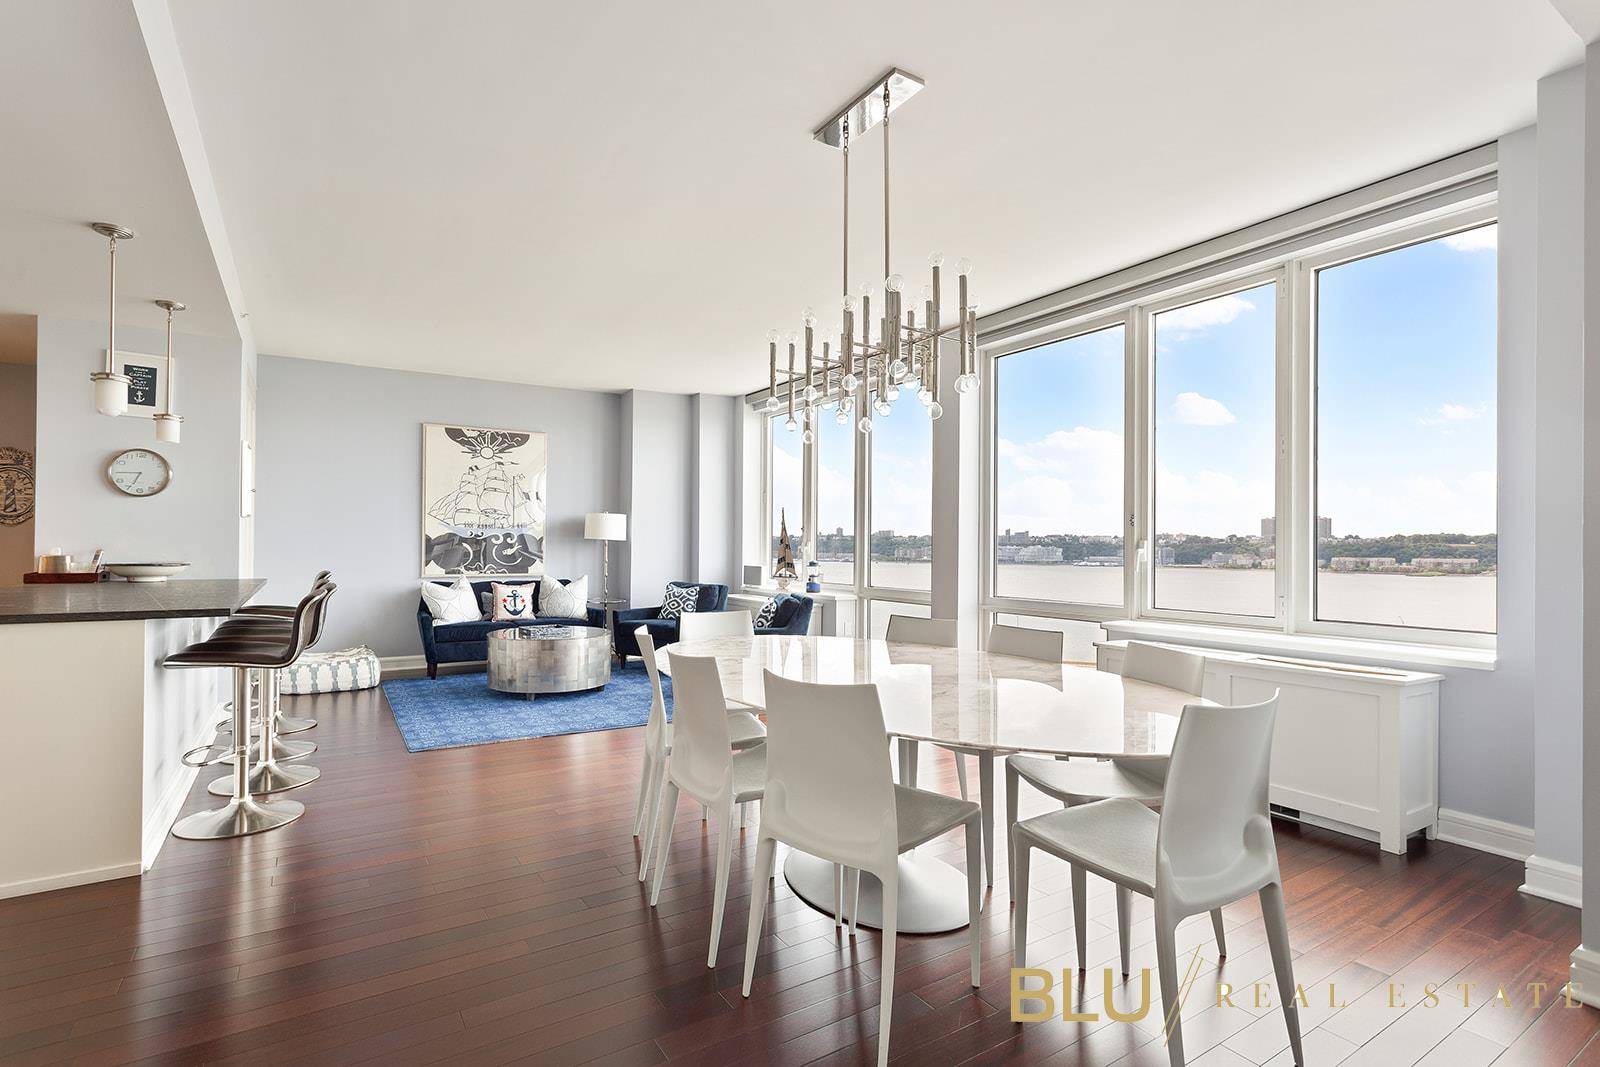 Step into this gorgeous 6 bedroom 6 bathroom home to be welcomed with expansive views of the Hudson River.